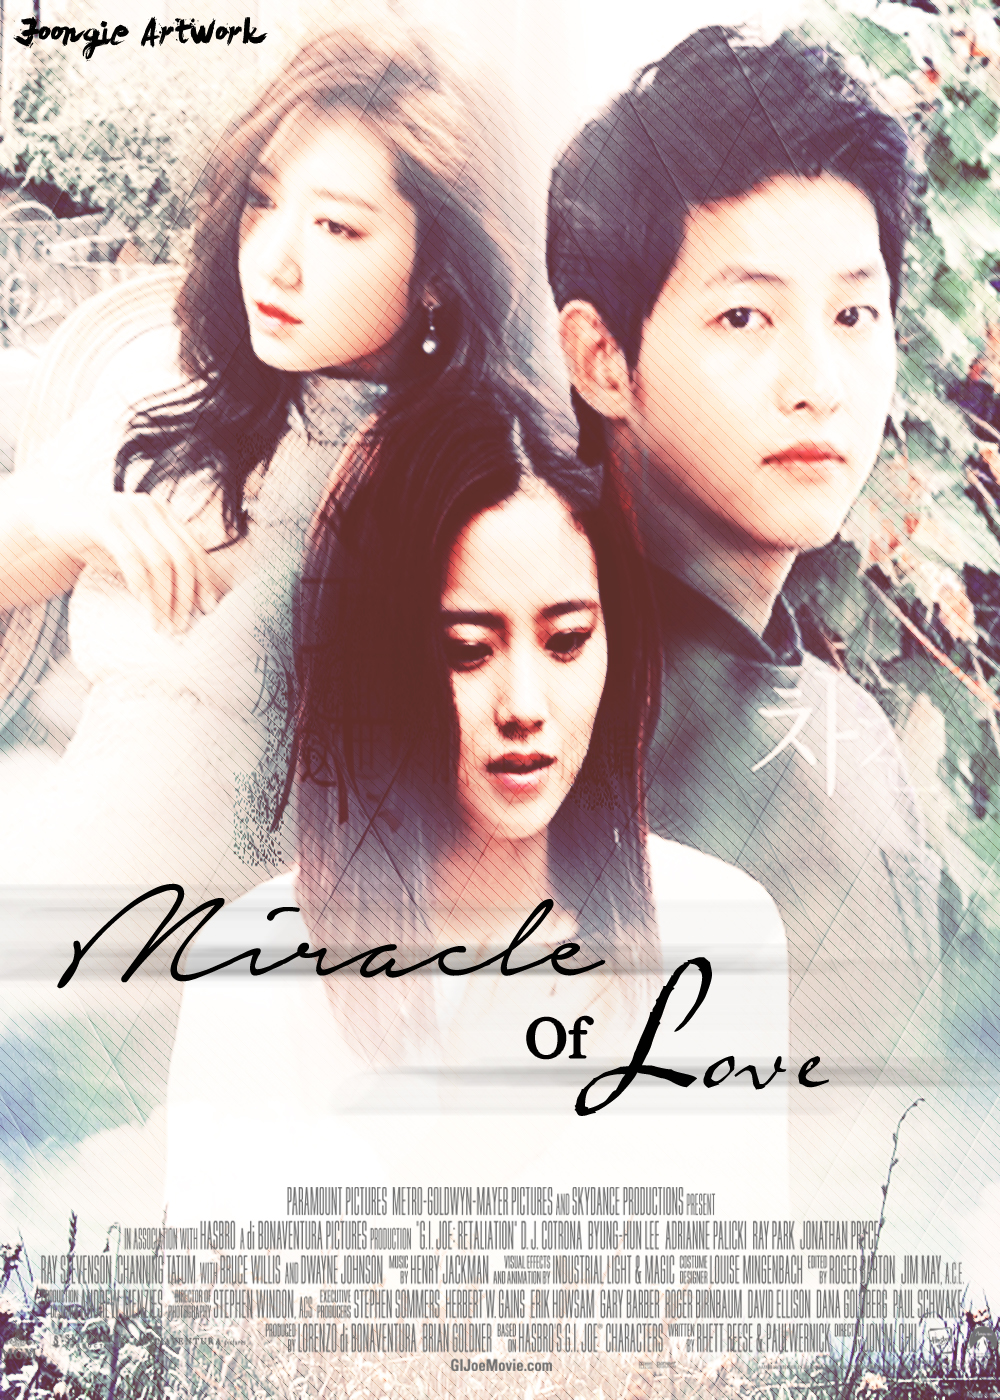 FF TERRENCE Miracle Of Love Chapter 2 C H E O N S A T O P I A